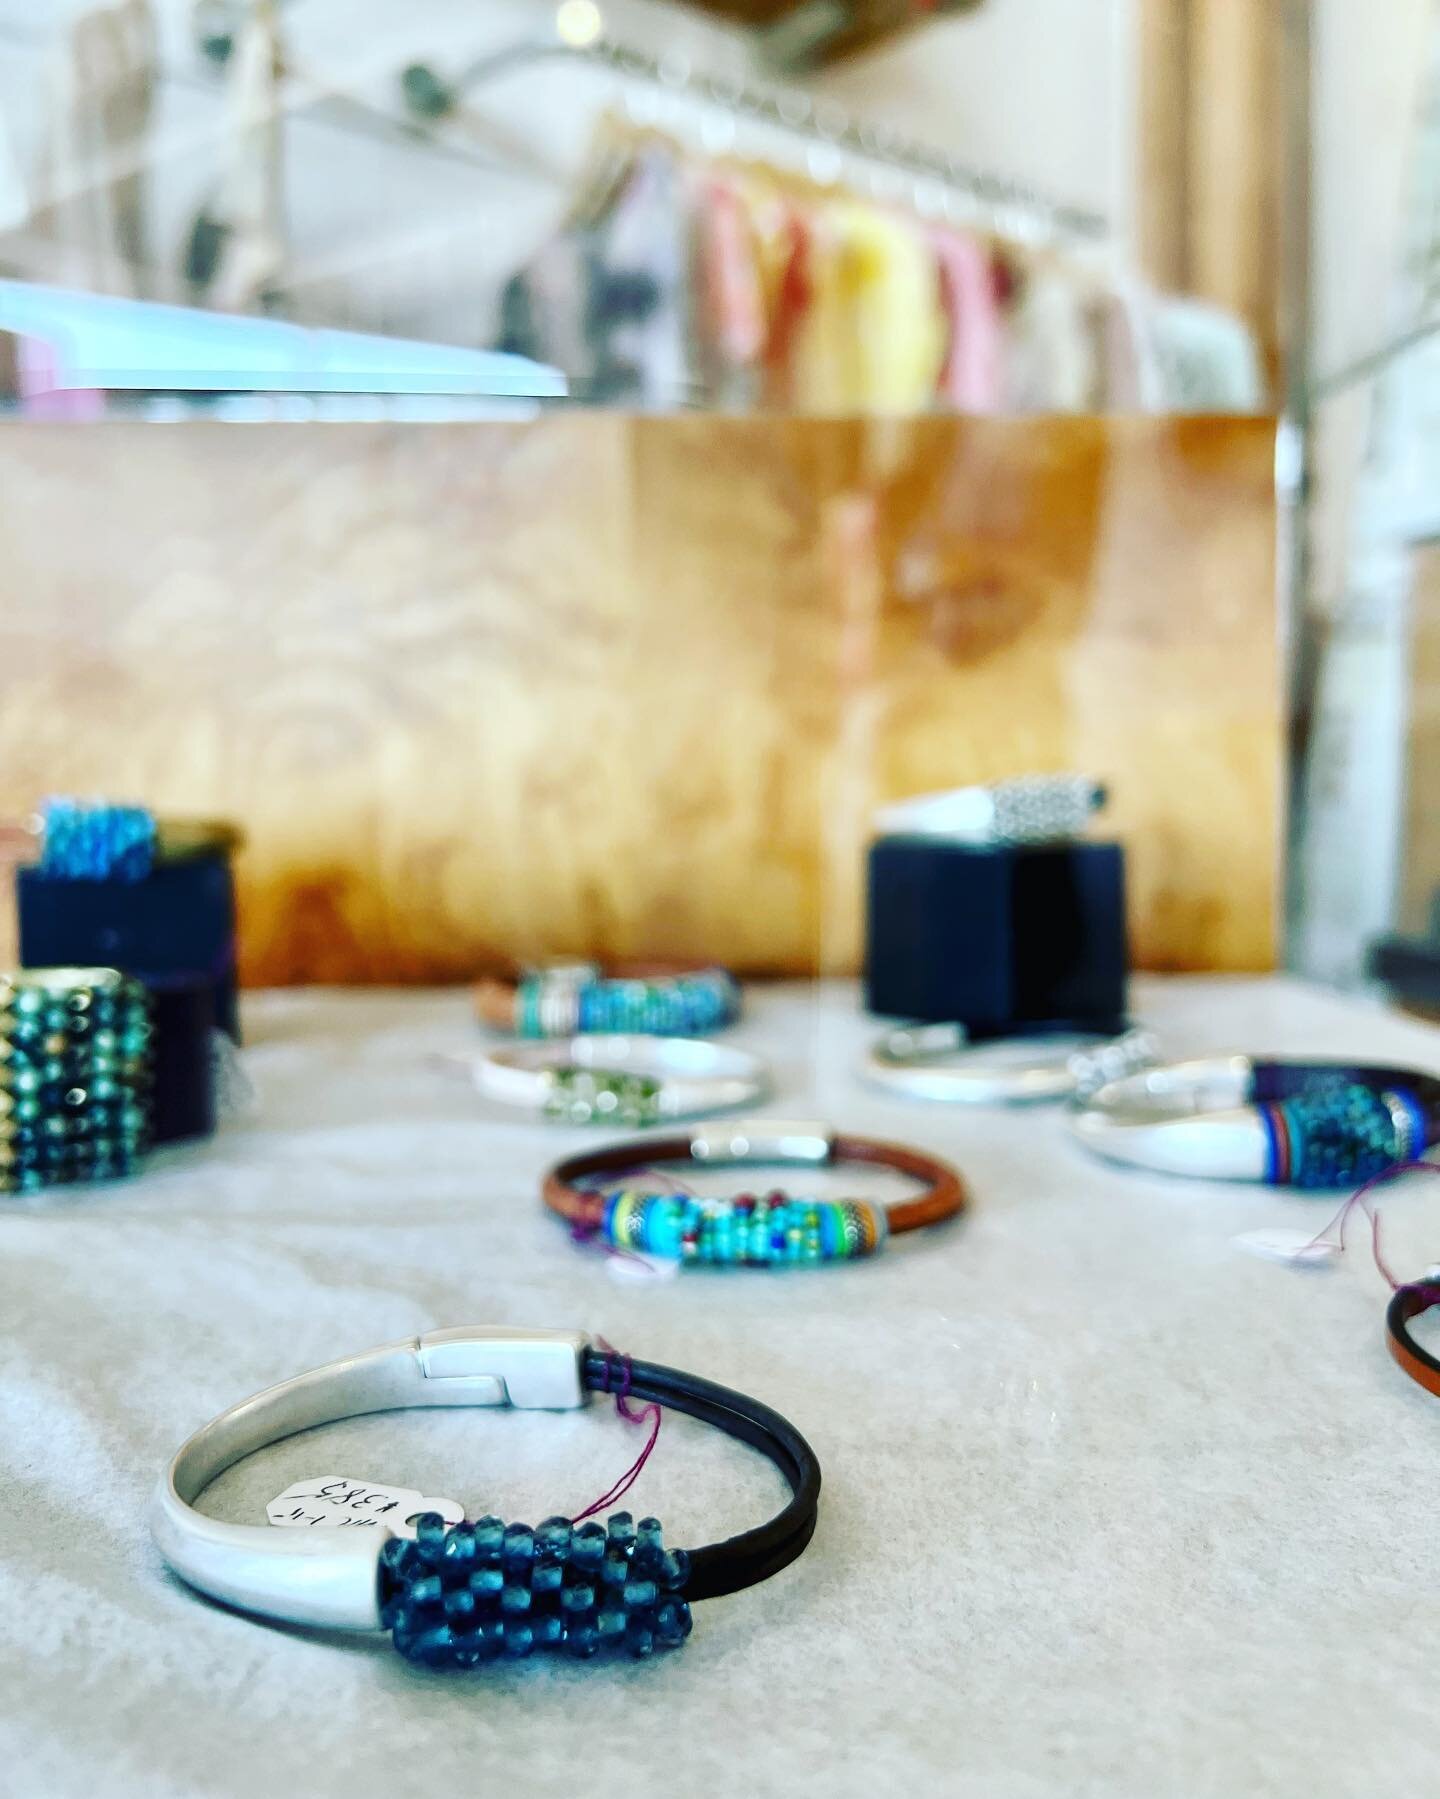 We&rsquo;ve got gorgeous bracelets in with leather, silver, and stunning gems with a magnetic closure. Easy peasy on and off. 👌🏼

.
.
.
.
.

#handdyed 
#shoplocal
#oneofakind 
#art 
#arizona 
#scottsdale 
#phoenix 
#artist 
#oneofakind 
#ootd 
#fas